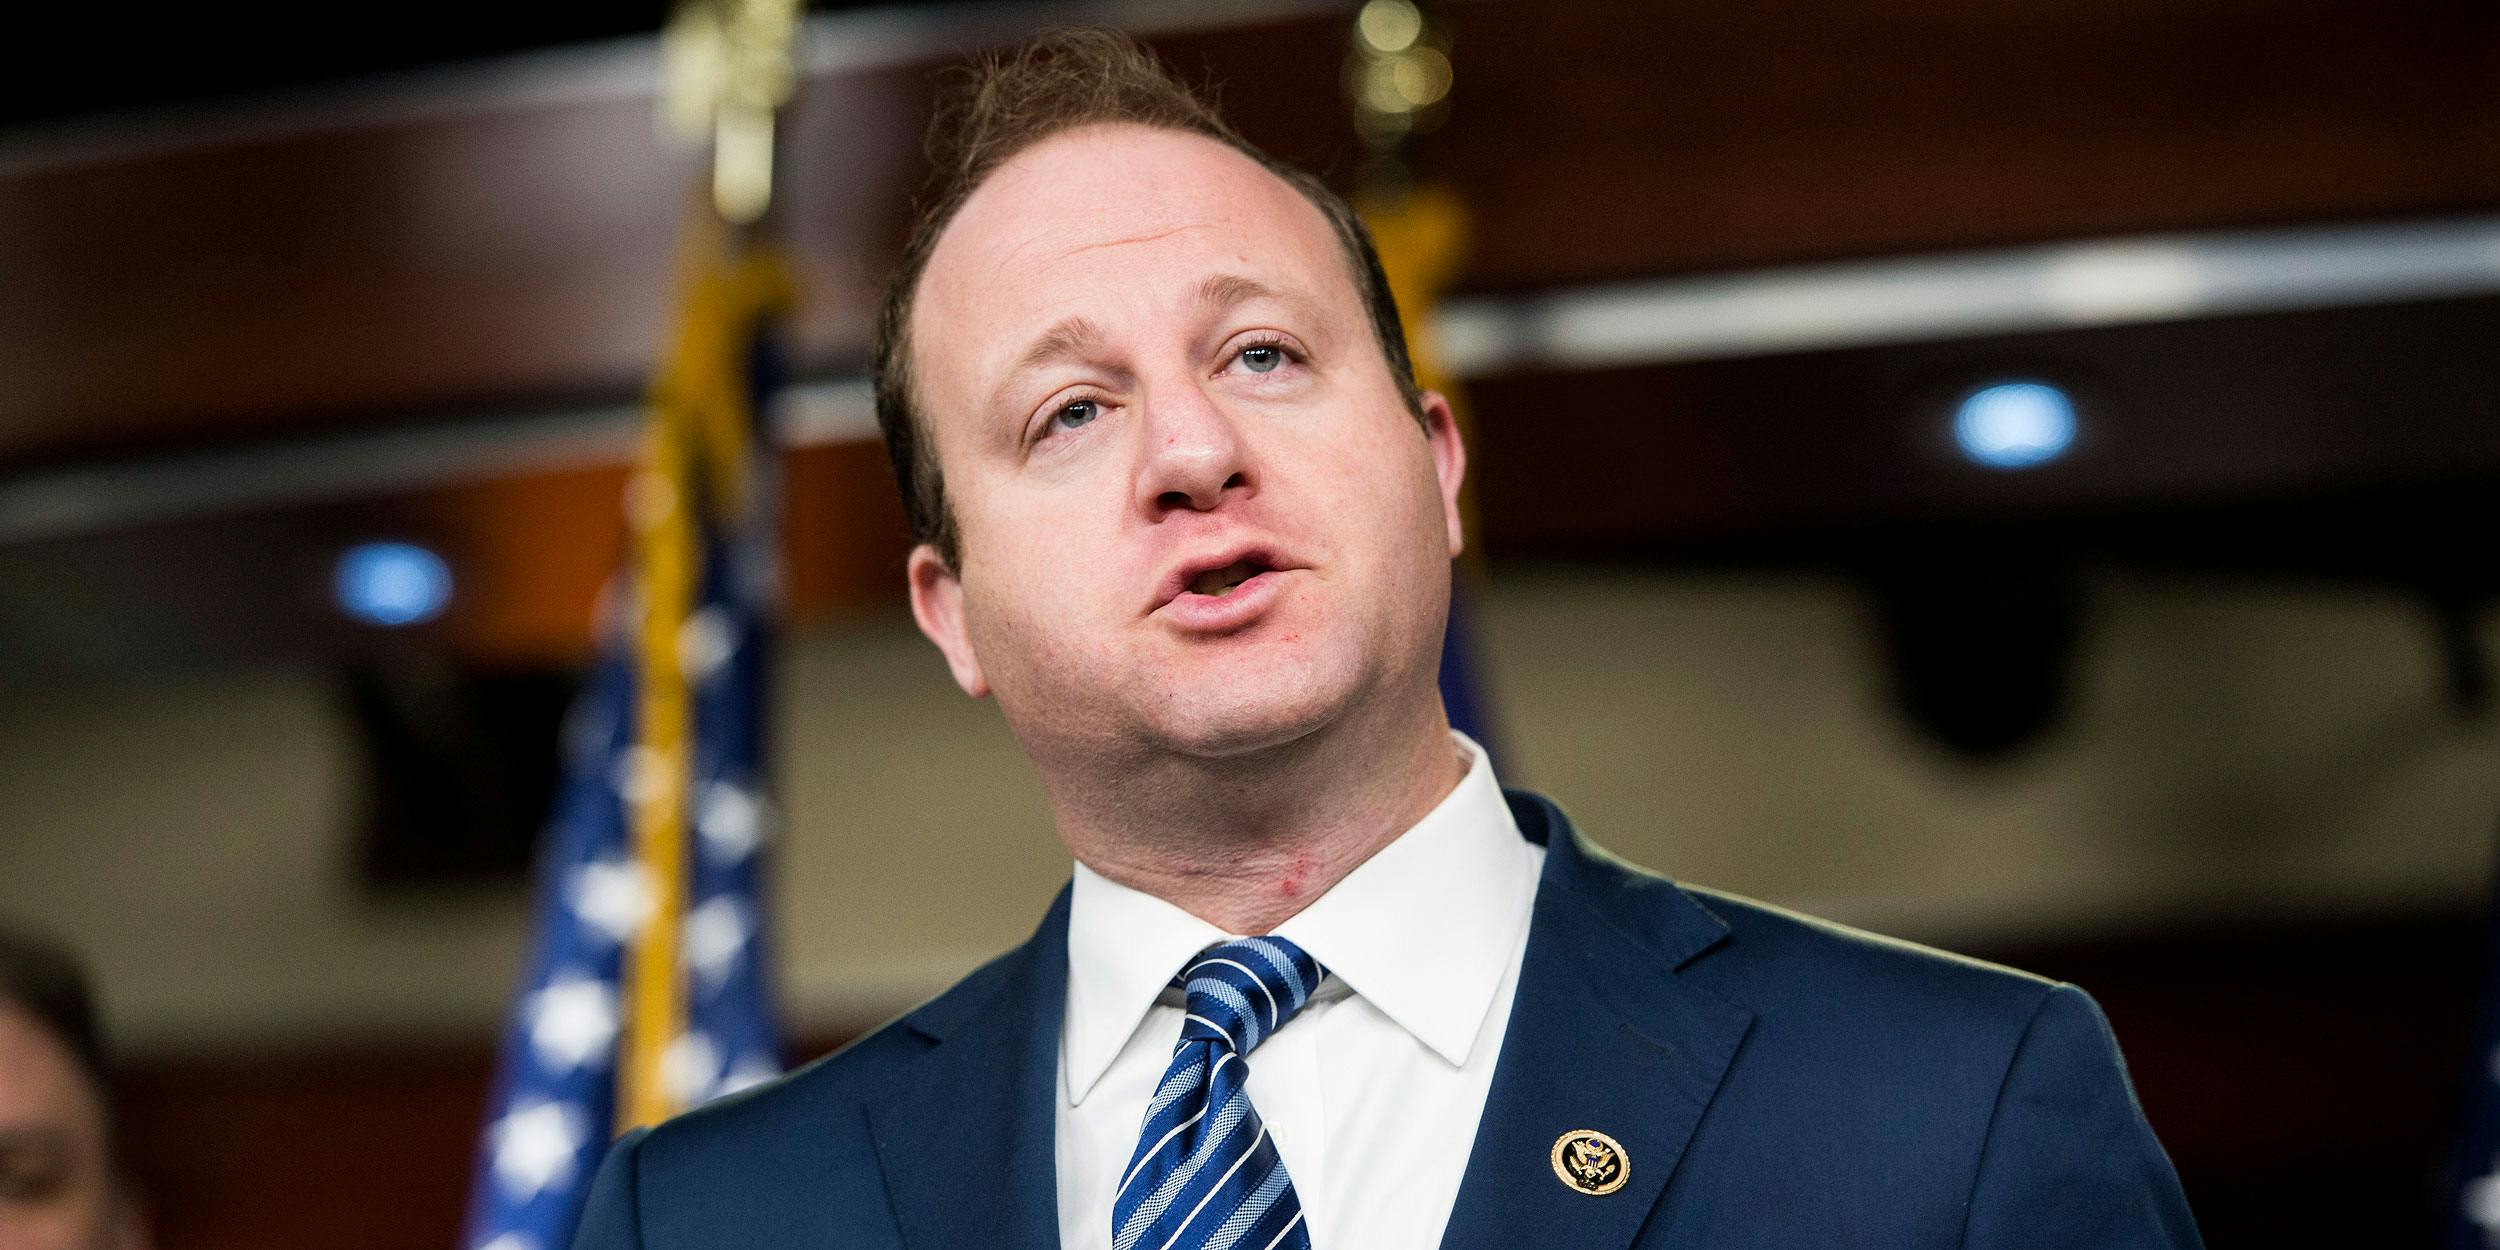 UNITED STATES - JANUARY 13: Rep. Jared Polis, D-Colo., speaks during a House Democrats' news conference in the Capitol on Tuesday, Jan. 13, 2015, to discuss plans to educate immigrant communities for the implementation of the executive actions on immigration announced by President Obama in November. (Photo By Bill Clark/CQ Roll Call)